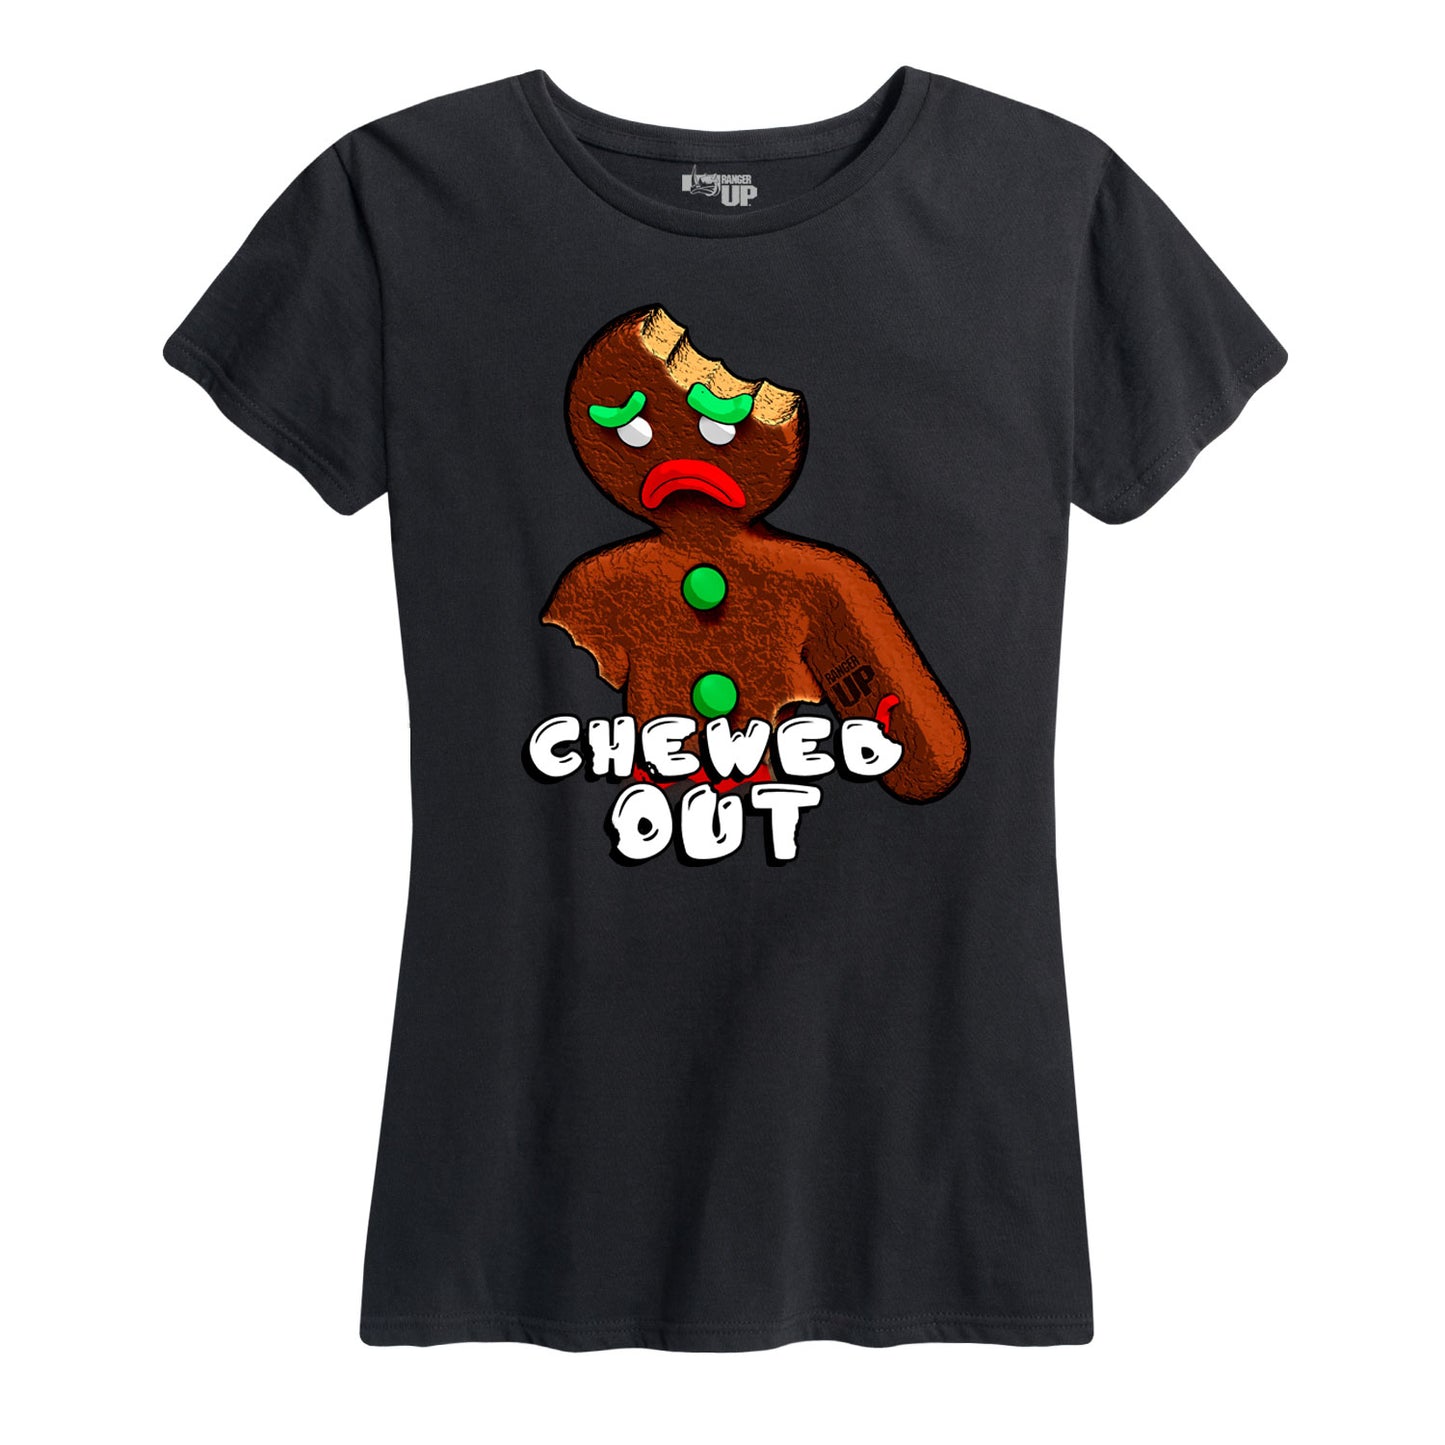 Women's Chewed Out Tee